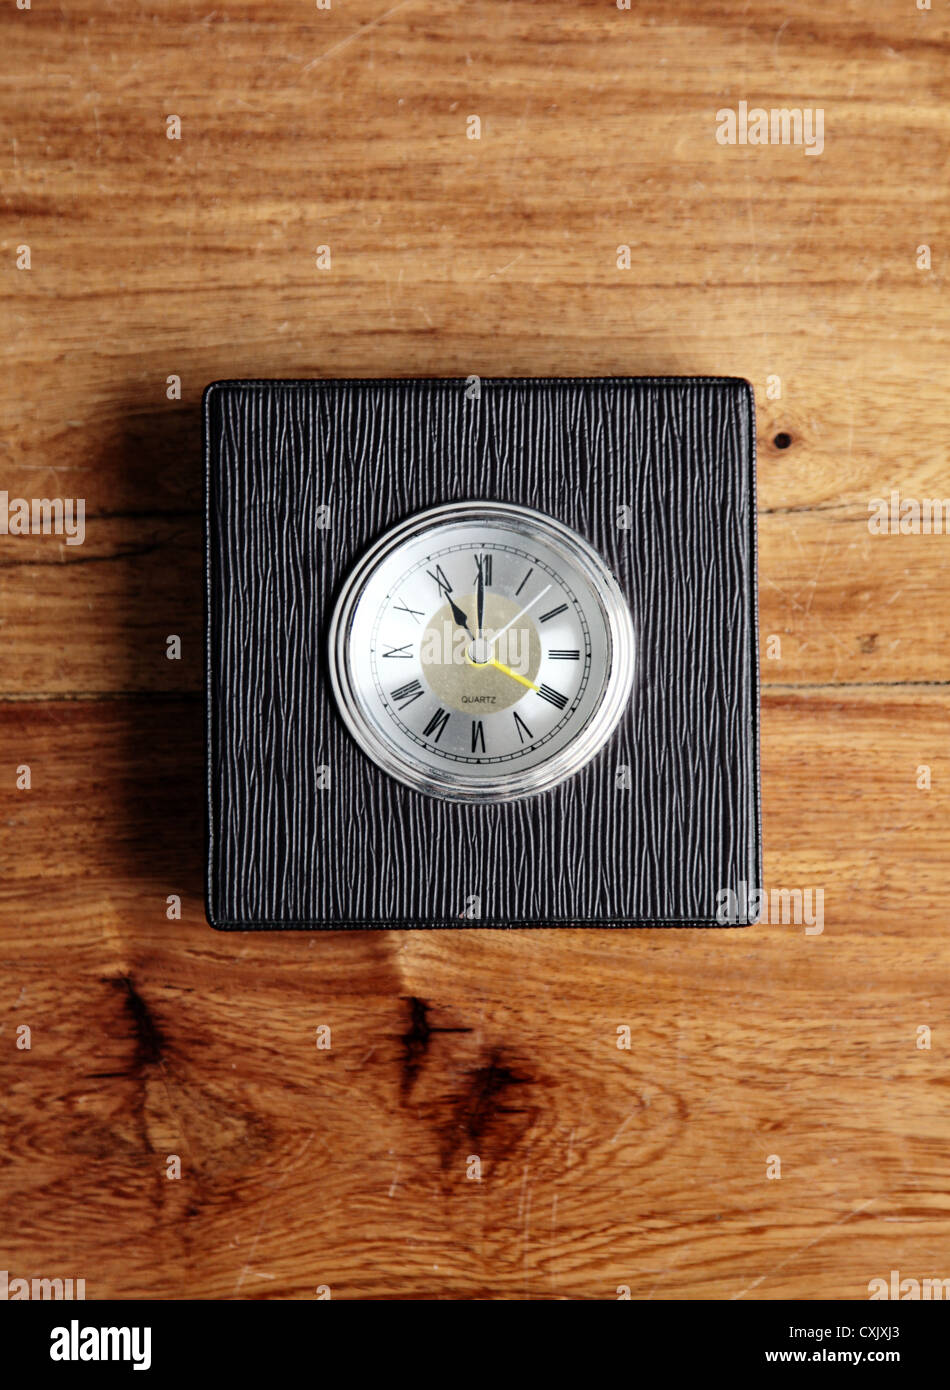 It's a photo of a clock or alarm clock that indicate nearly 11pm or 11am. It's a simple ans square little model. Stock Photo